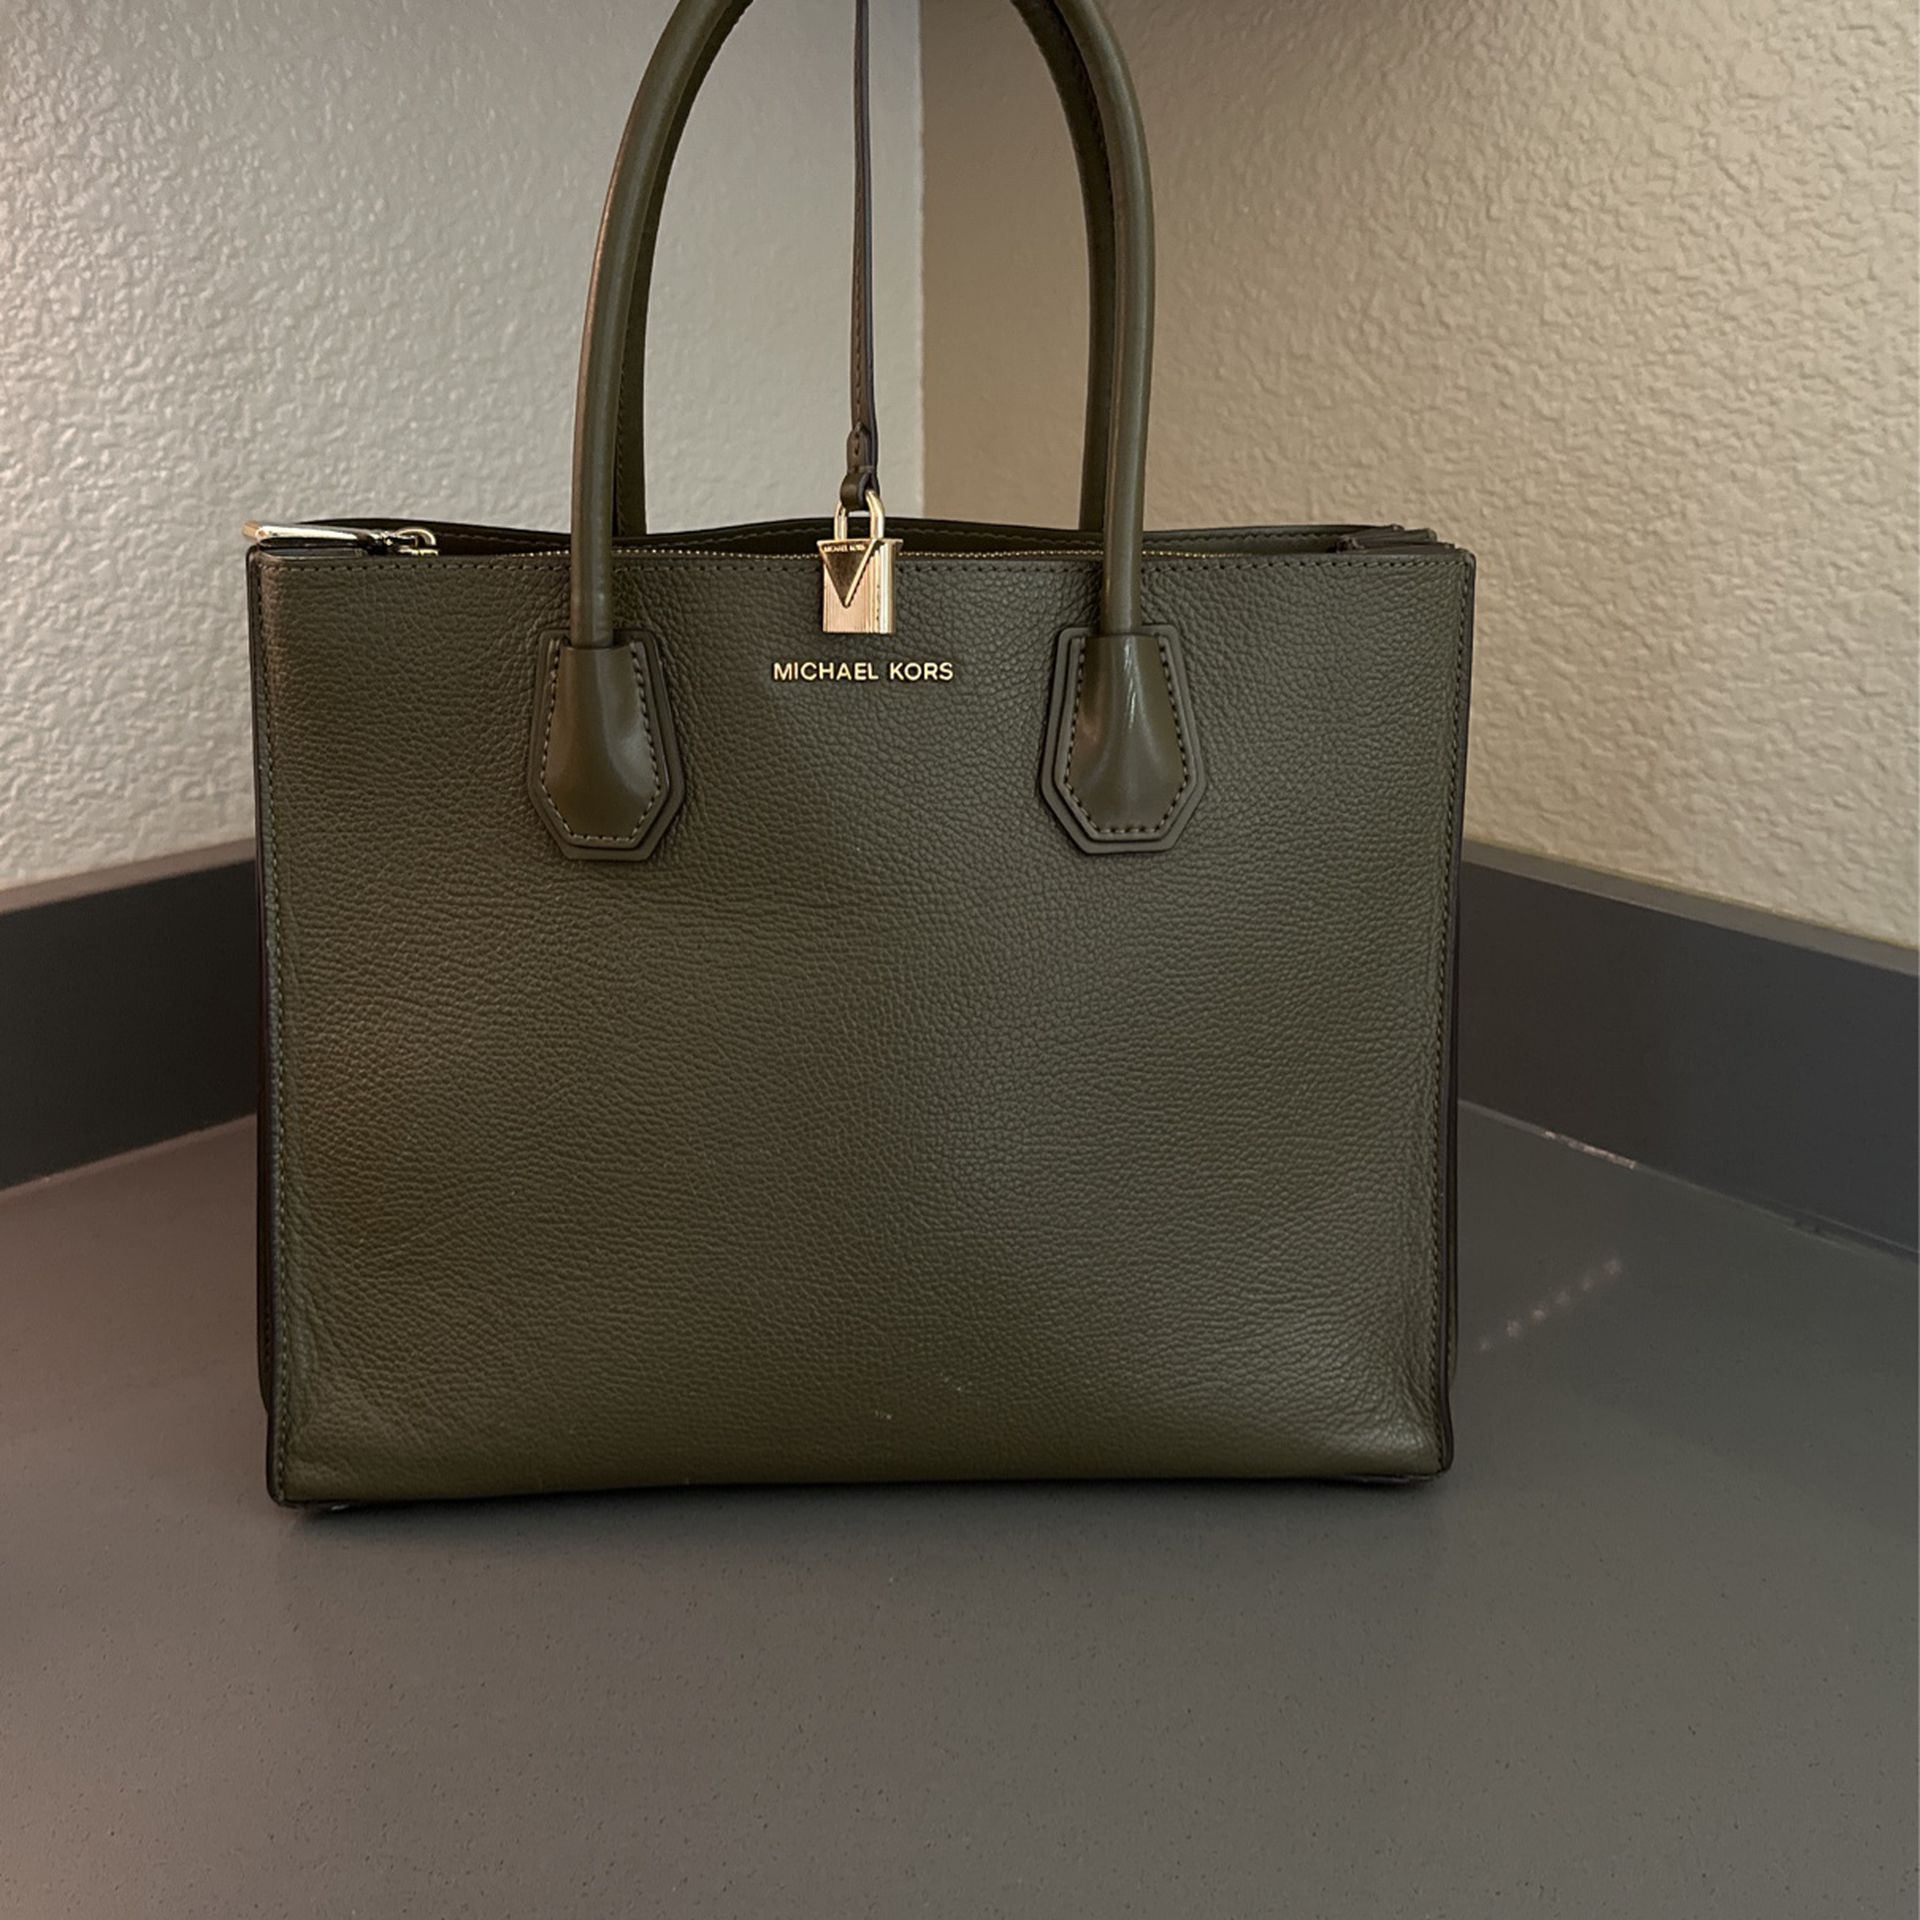 Dark Green, Michael Kors Purse for Sale in Issaquah, WA - OfferUp